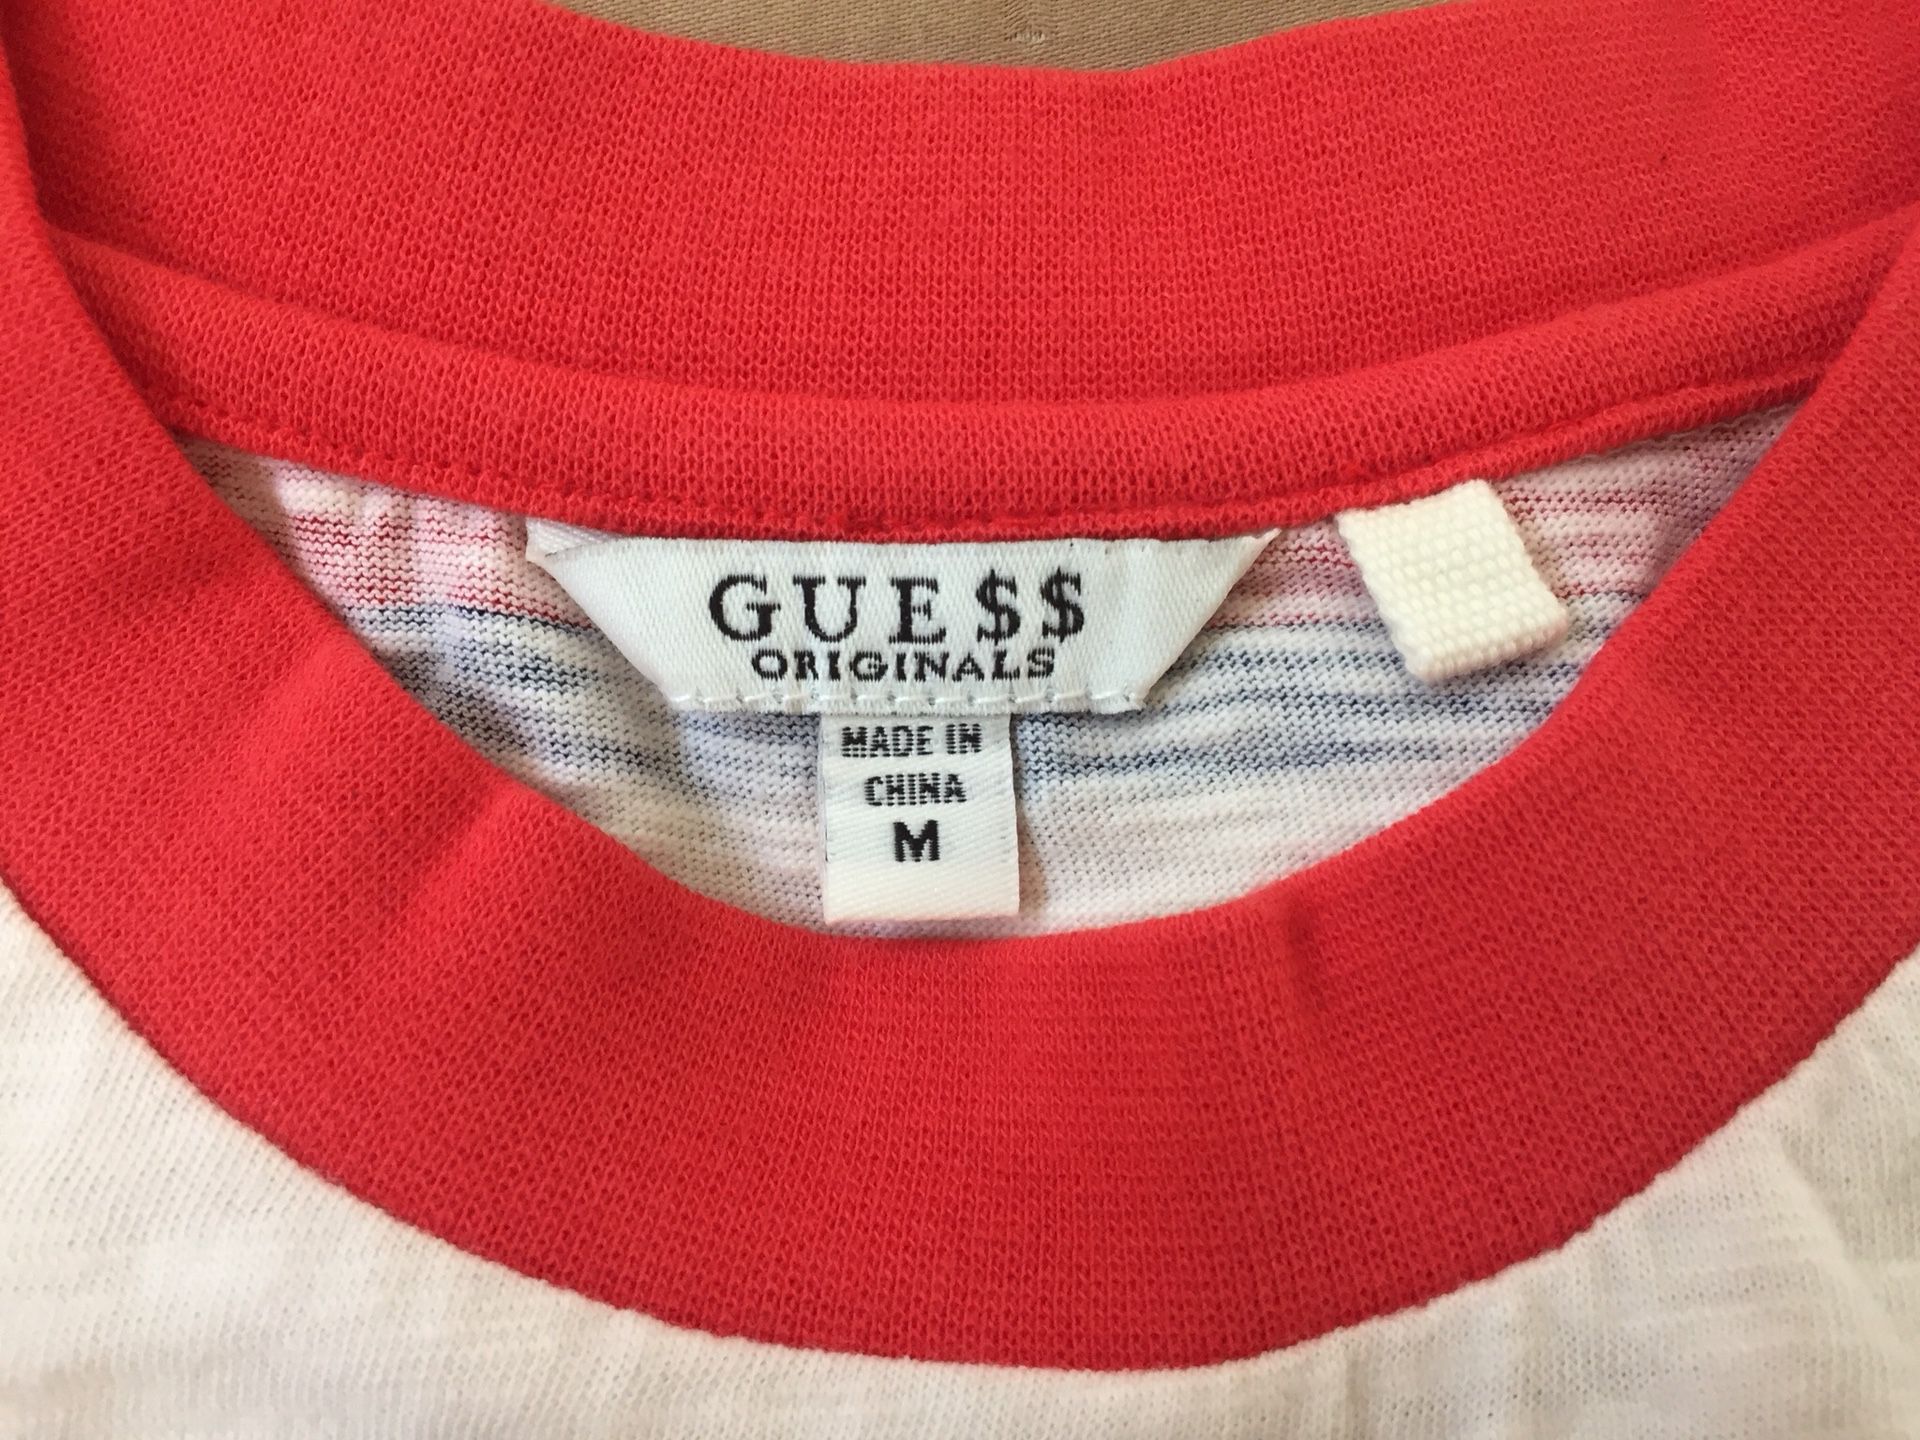 M GUE$$ / GUESS JEANS x A$AP / ASAP ROCKY Japan Exclusive Supreme Short Sleeve Shirt Red White Blue for Sale in Carlsbad, CA - OfferUp